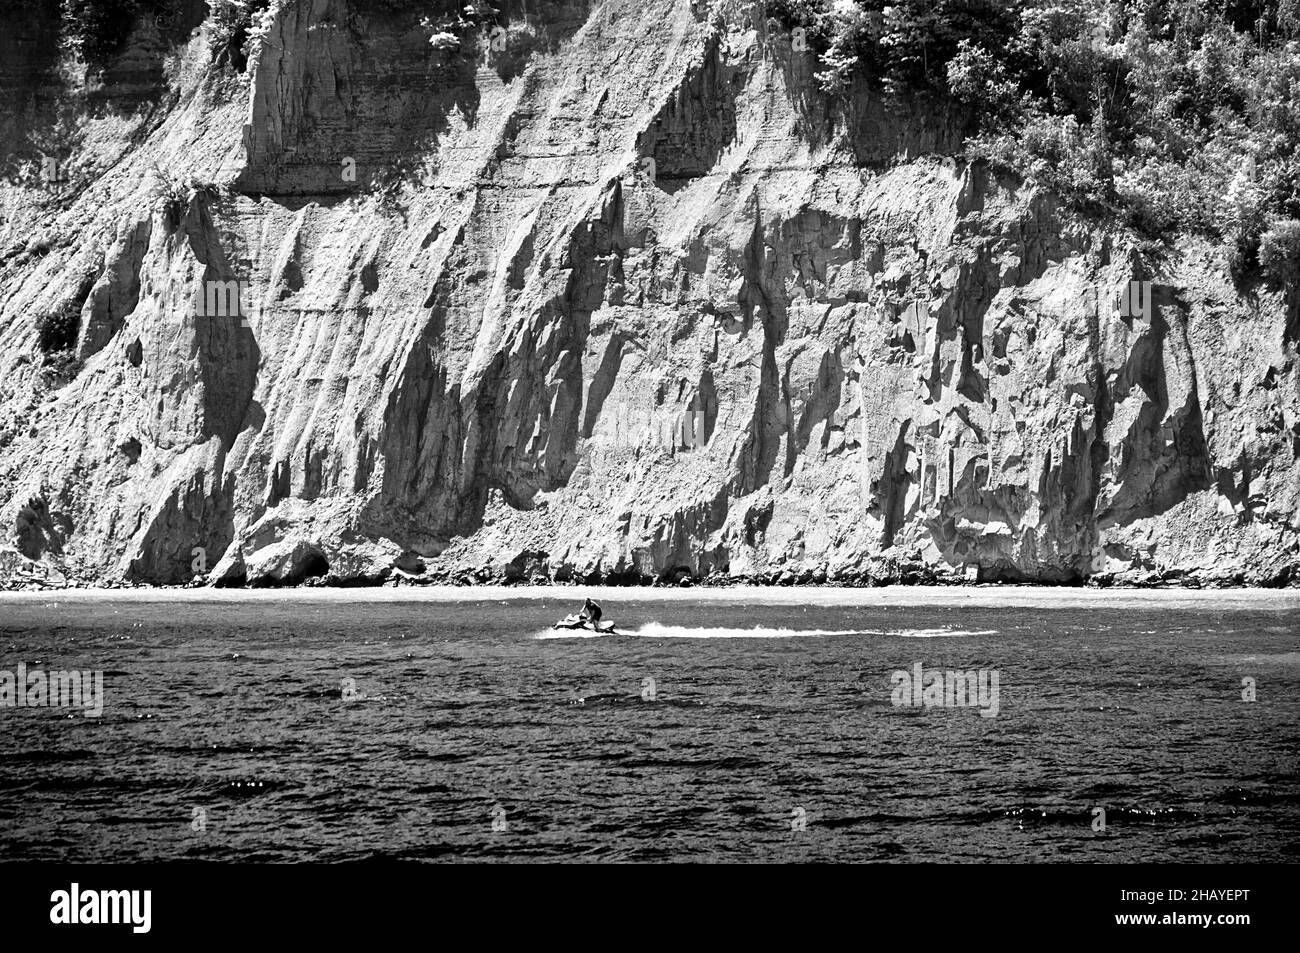 Sun, rocks, water. Speedy scooter in the waters of Lake Ontario at the Scarborough Bluffs Park, the city outdoor destination popular among the Stock Photo